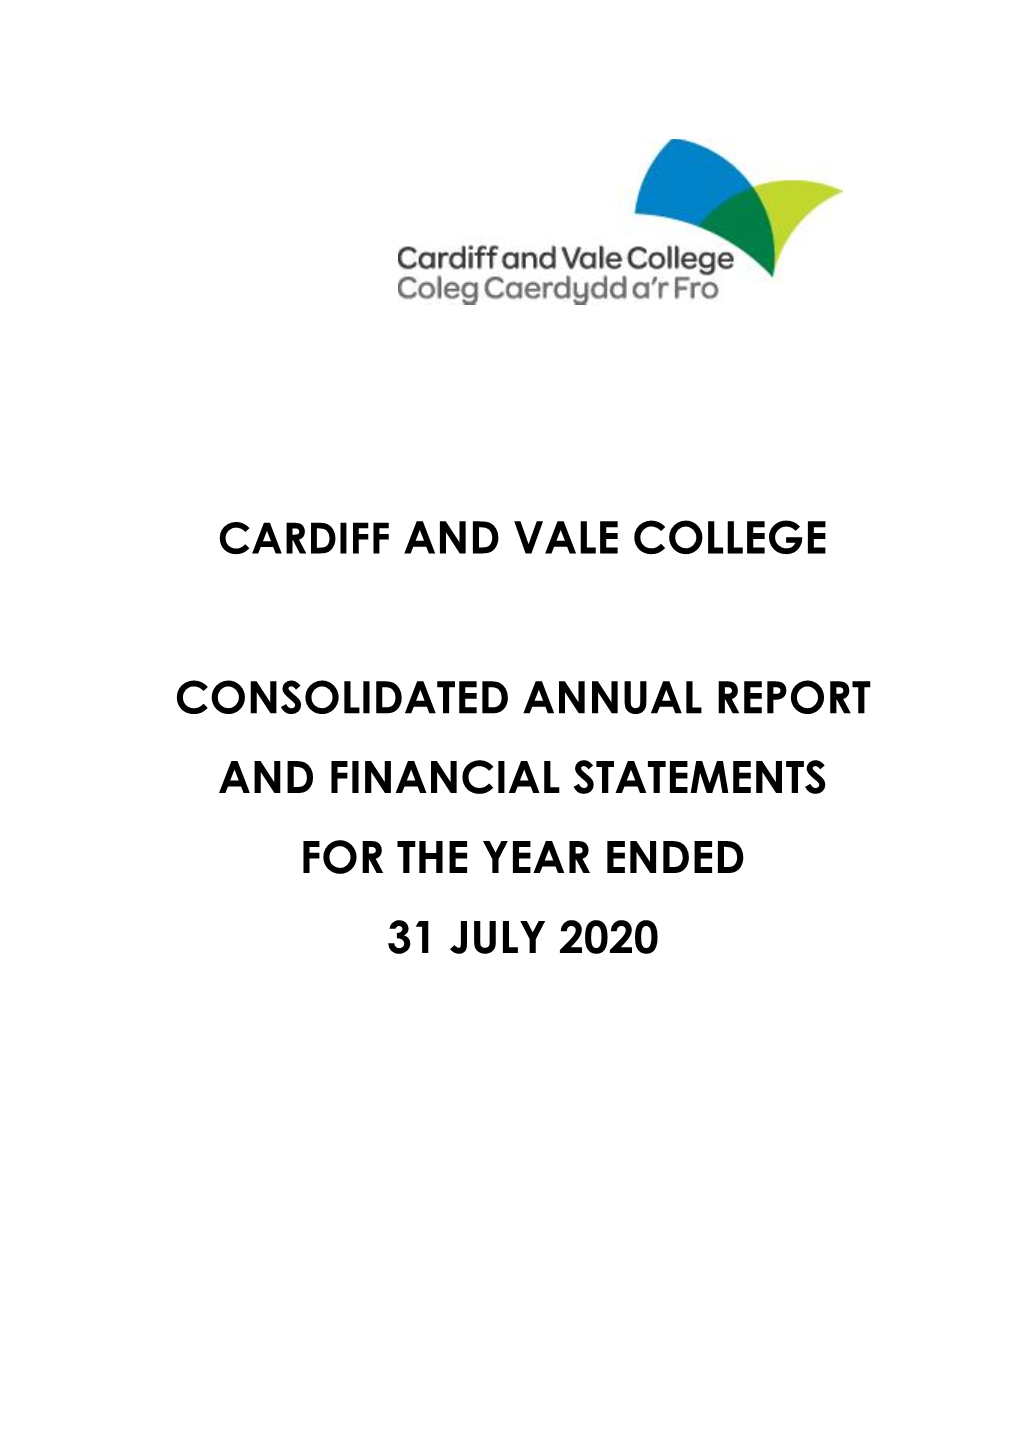 Consolidated Annual Report and Financial Statements for the Year Ended 31 July 2020